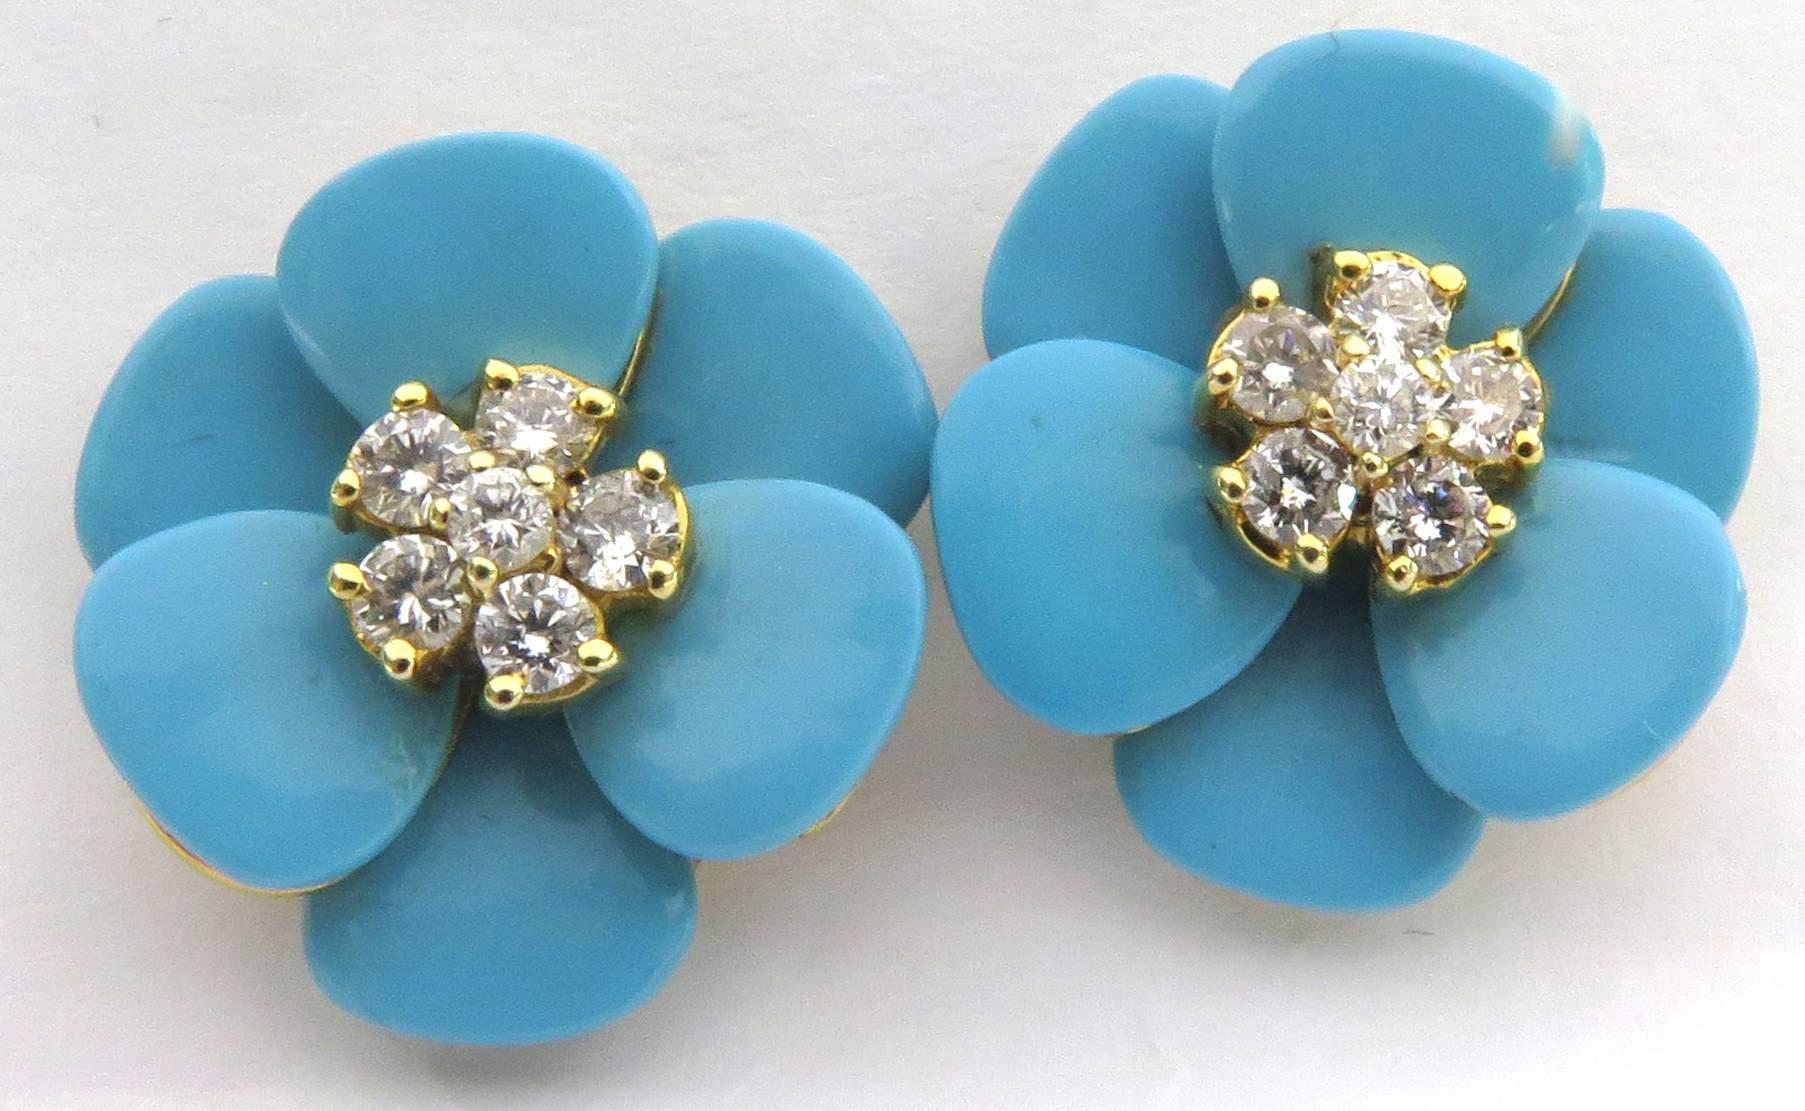 These beautiul turquoise 18k yellow gold earrings are so versitle, you will be able to wear them with anything. Each of these earrings contains 6 prong set diamonds. The diamond weight is approx .60ct total weight
Each earring measures 3/4 inch